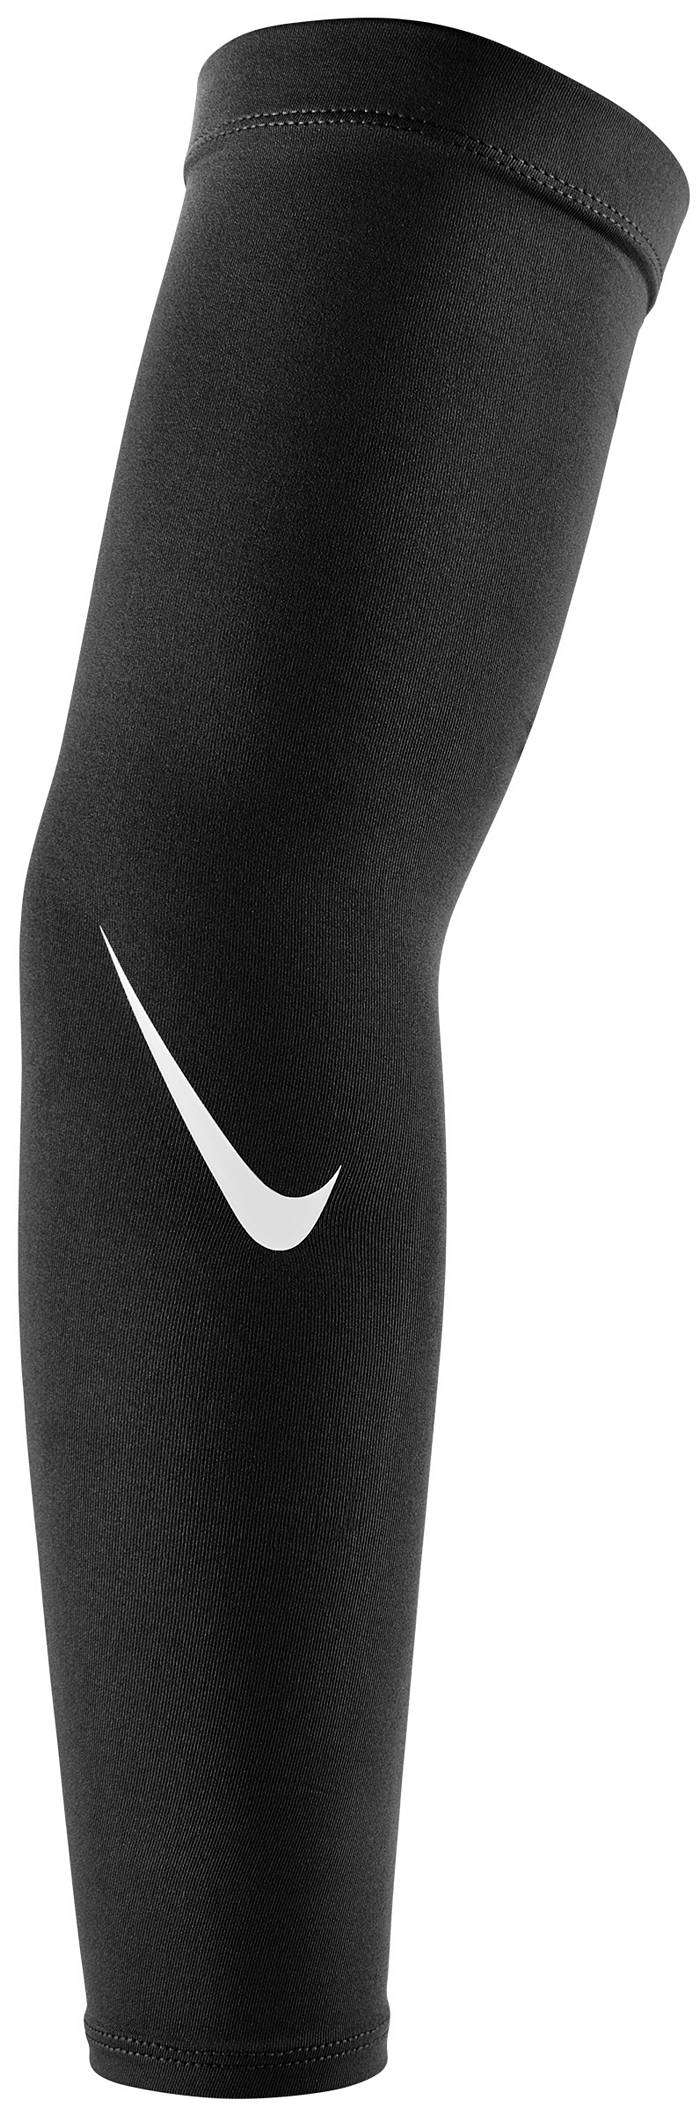 New Nike Cool Arm,Elbow UV Protection Cover Sleeve,Warmer  Basketball,Running